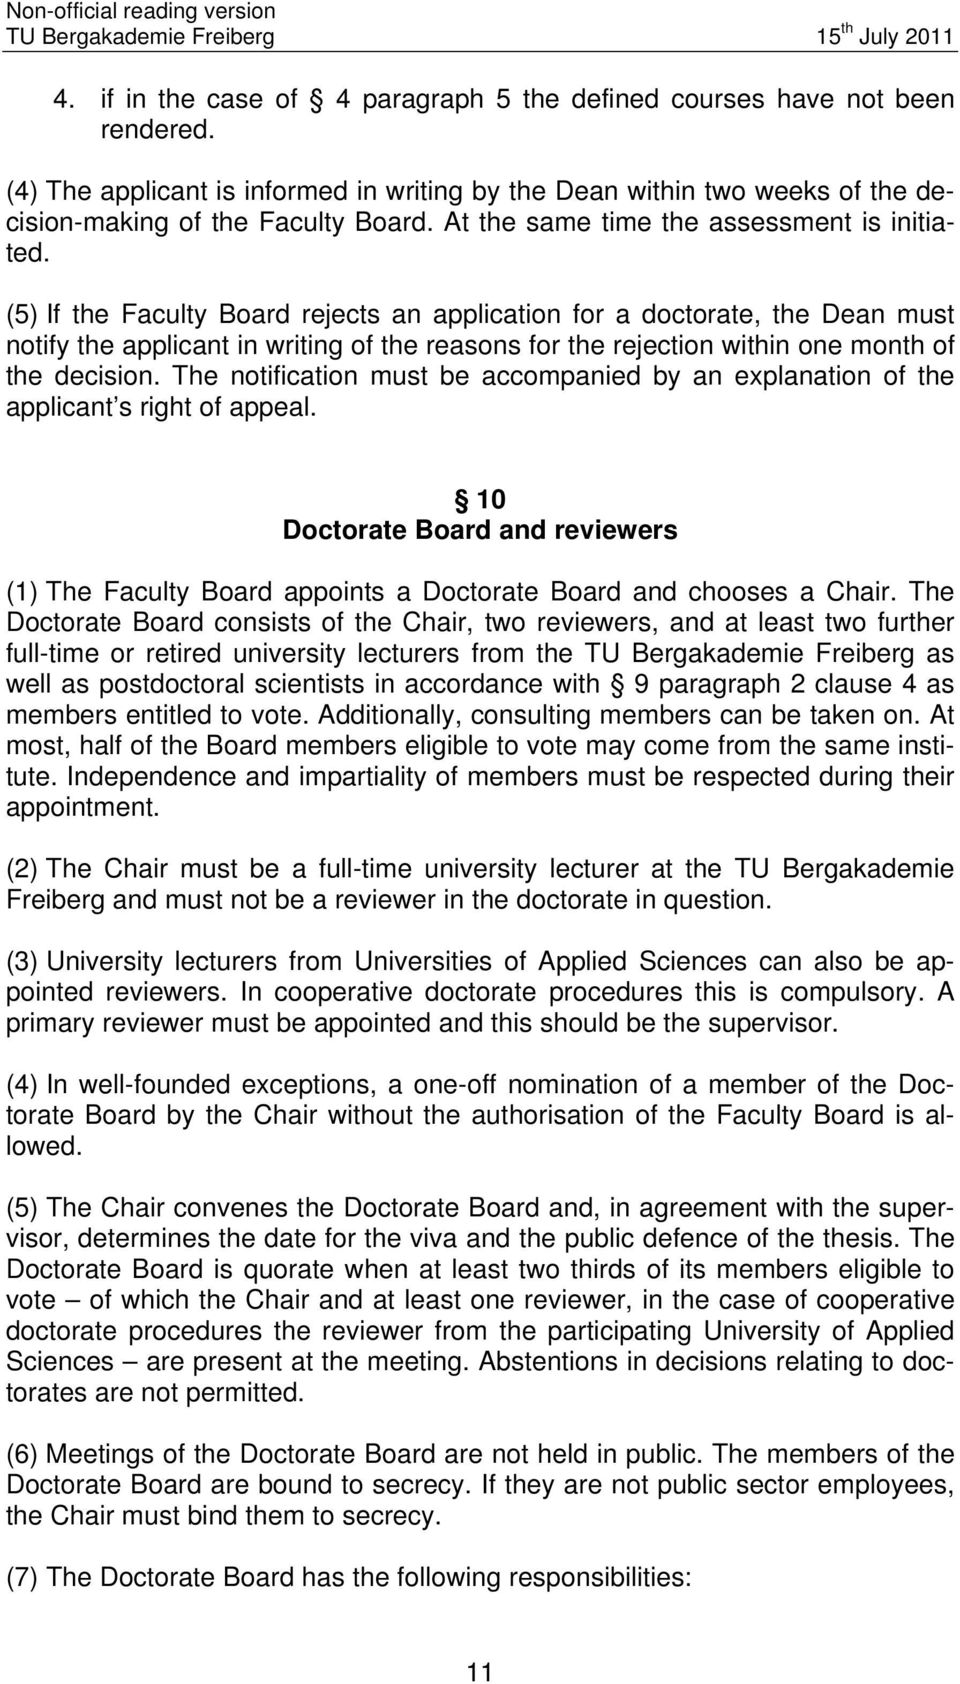 (5) If the Faculty Board rejects an application for a doctorate, the Dean must notify the applicant in writing of the reasons for the rejection within one month of the decision.